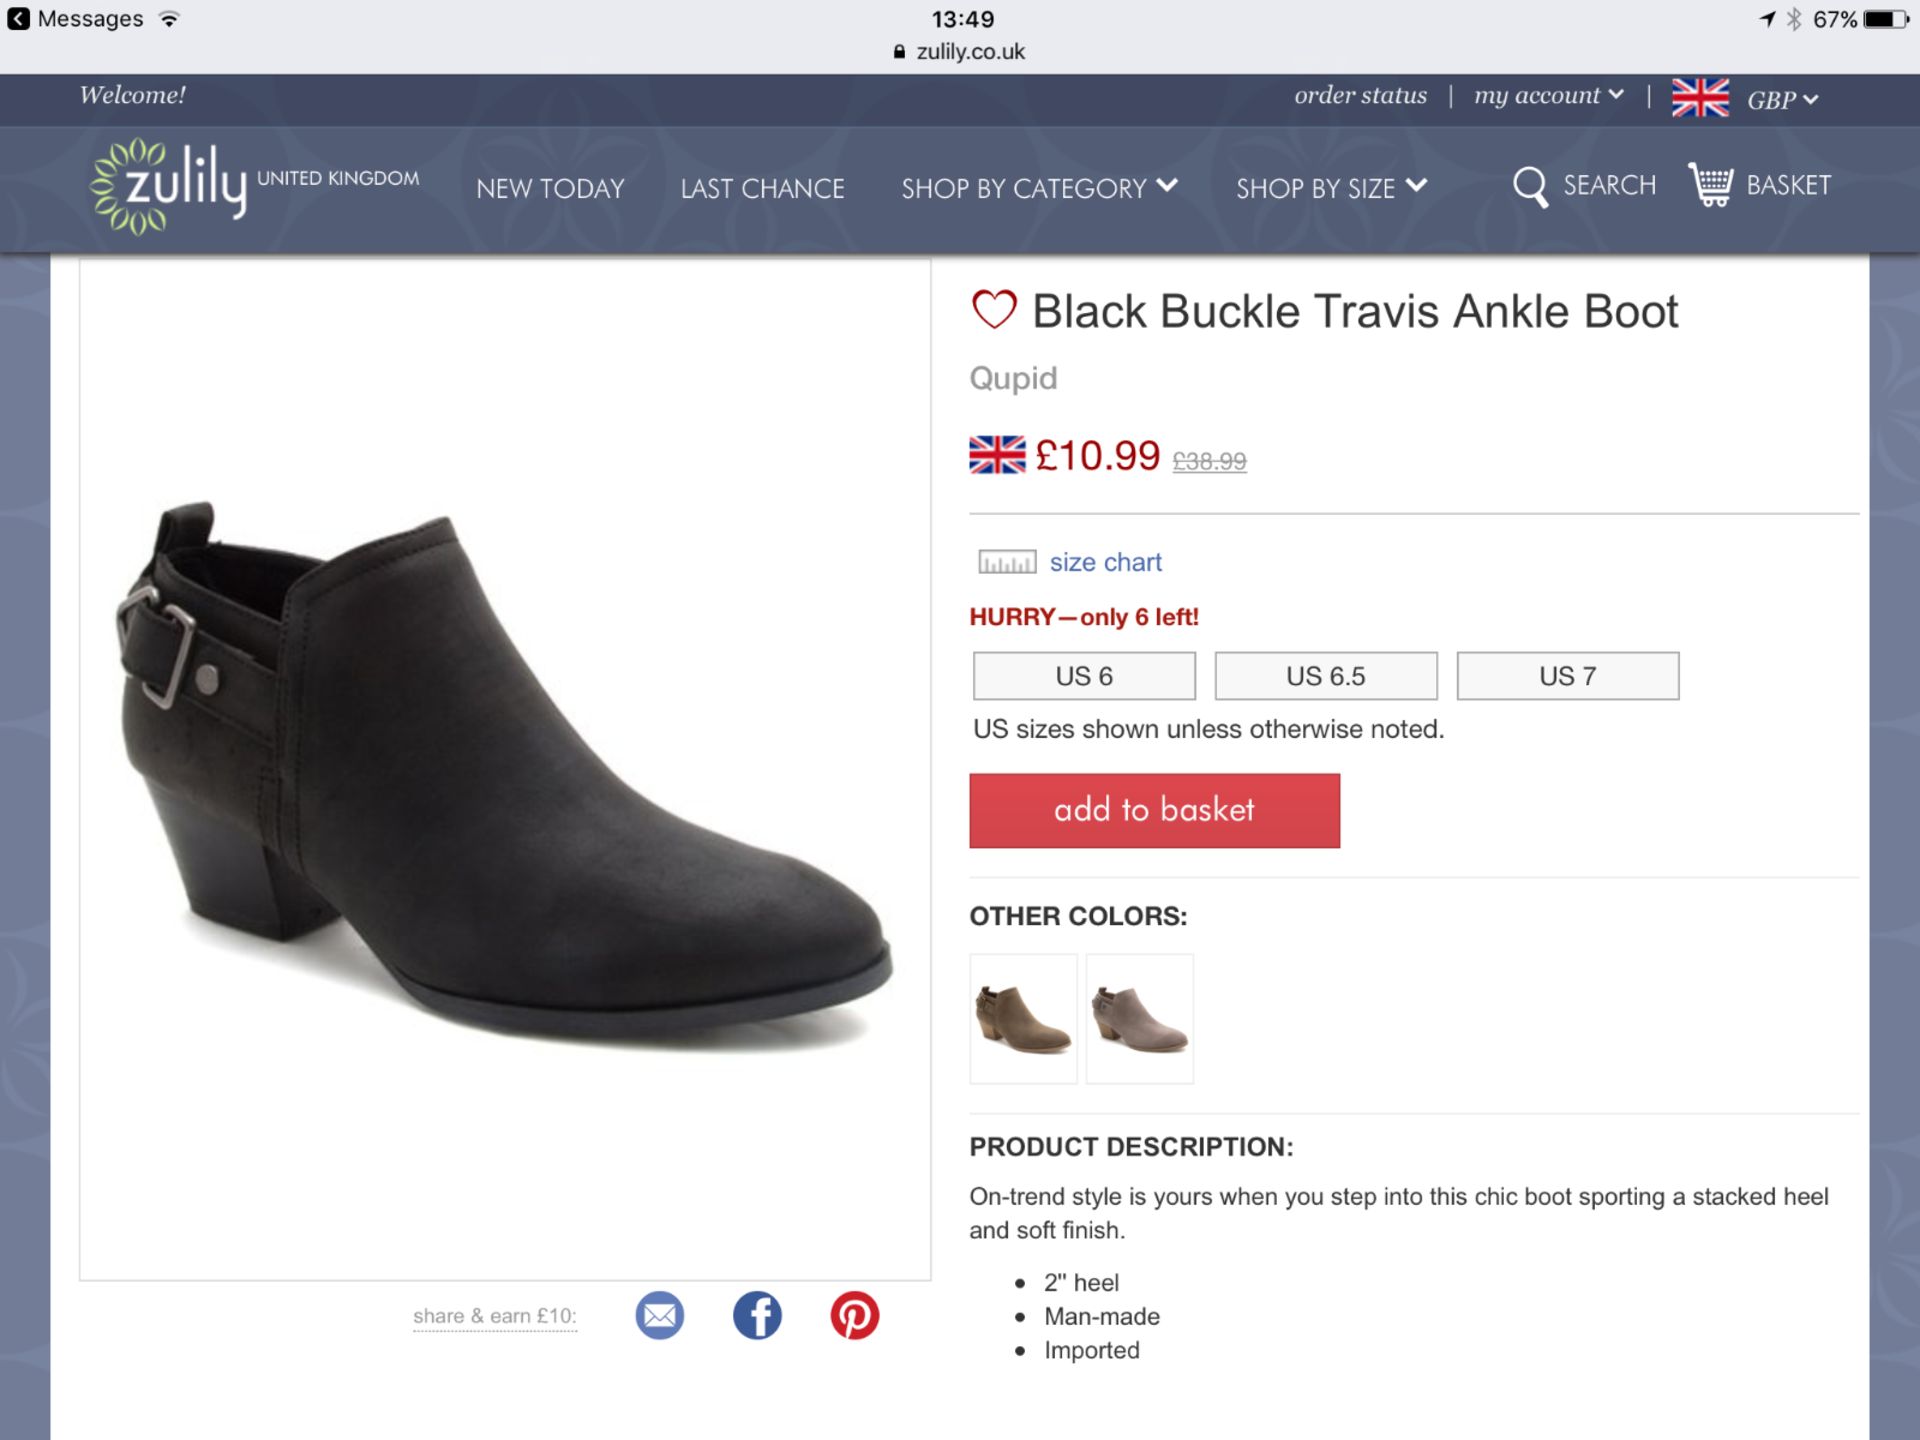 Qupid Black Buckle Travis Ankle Boot, Size US 6.5 Eur 36.5 (New with box) [Ref: 43334503- B-001] - Image 2 of 3